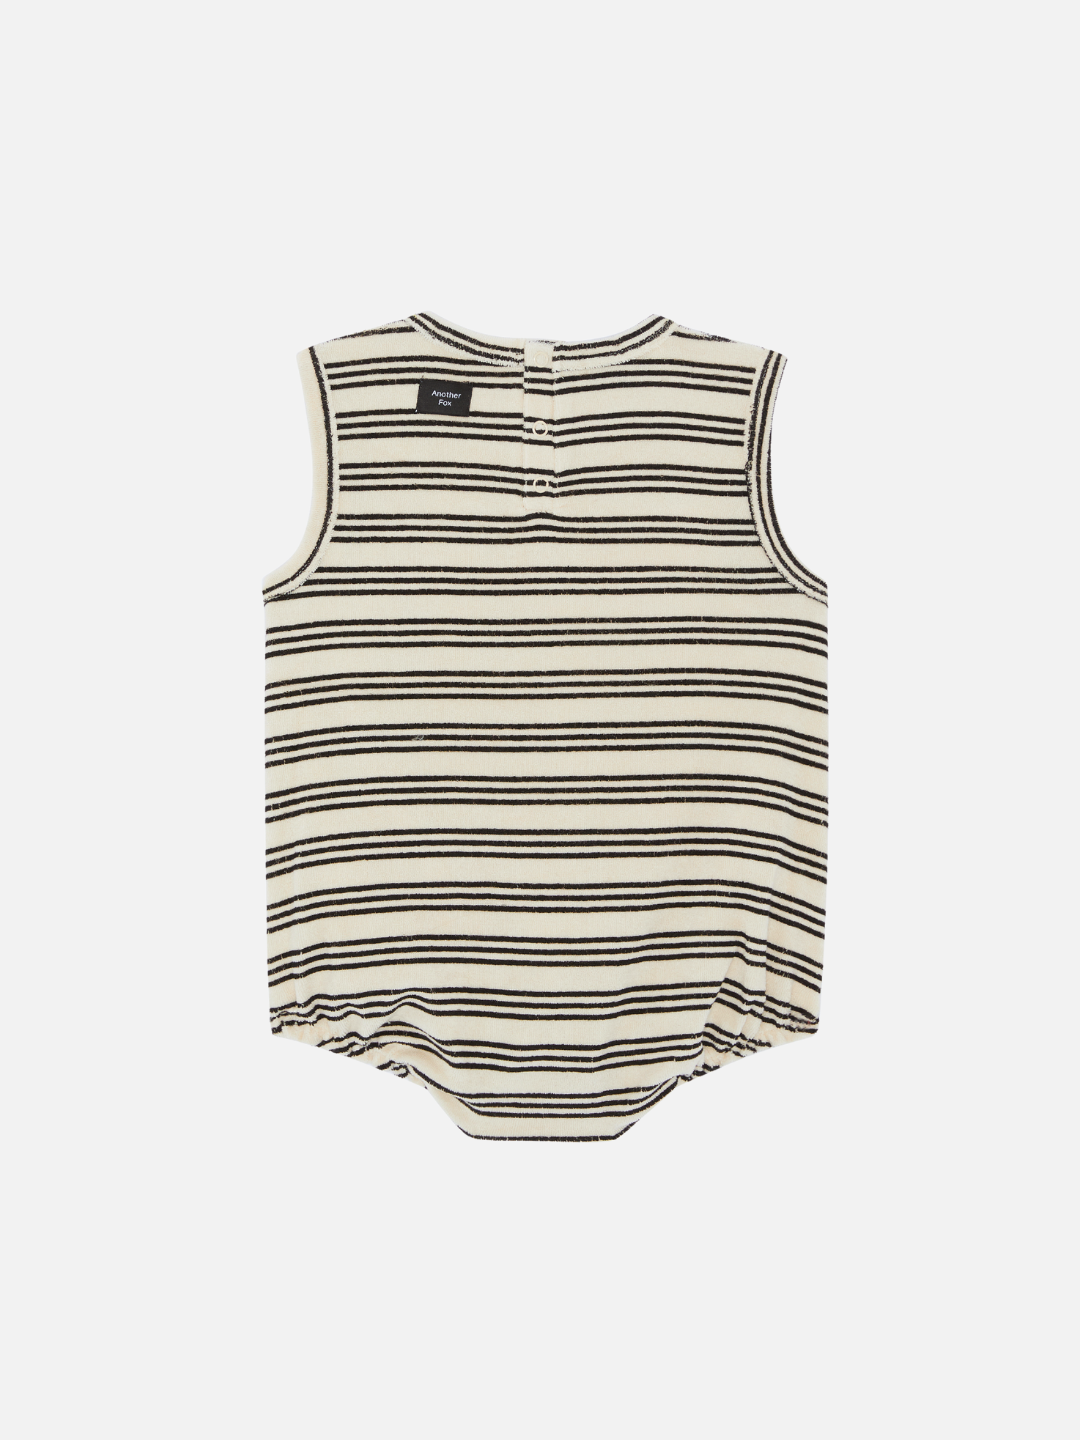 Stripe | Back view of the baby terry bubble bodysuit in stripe